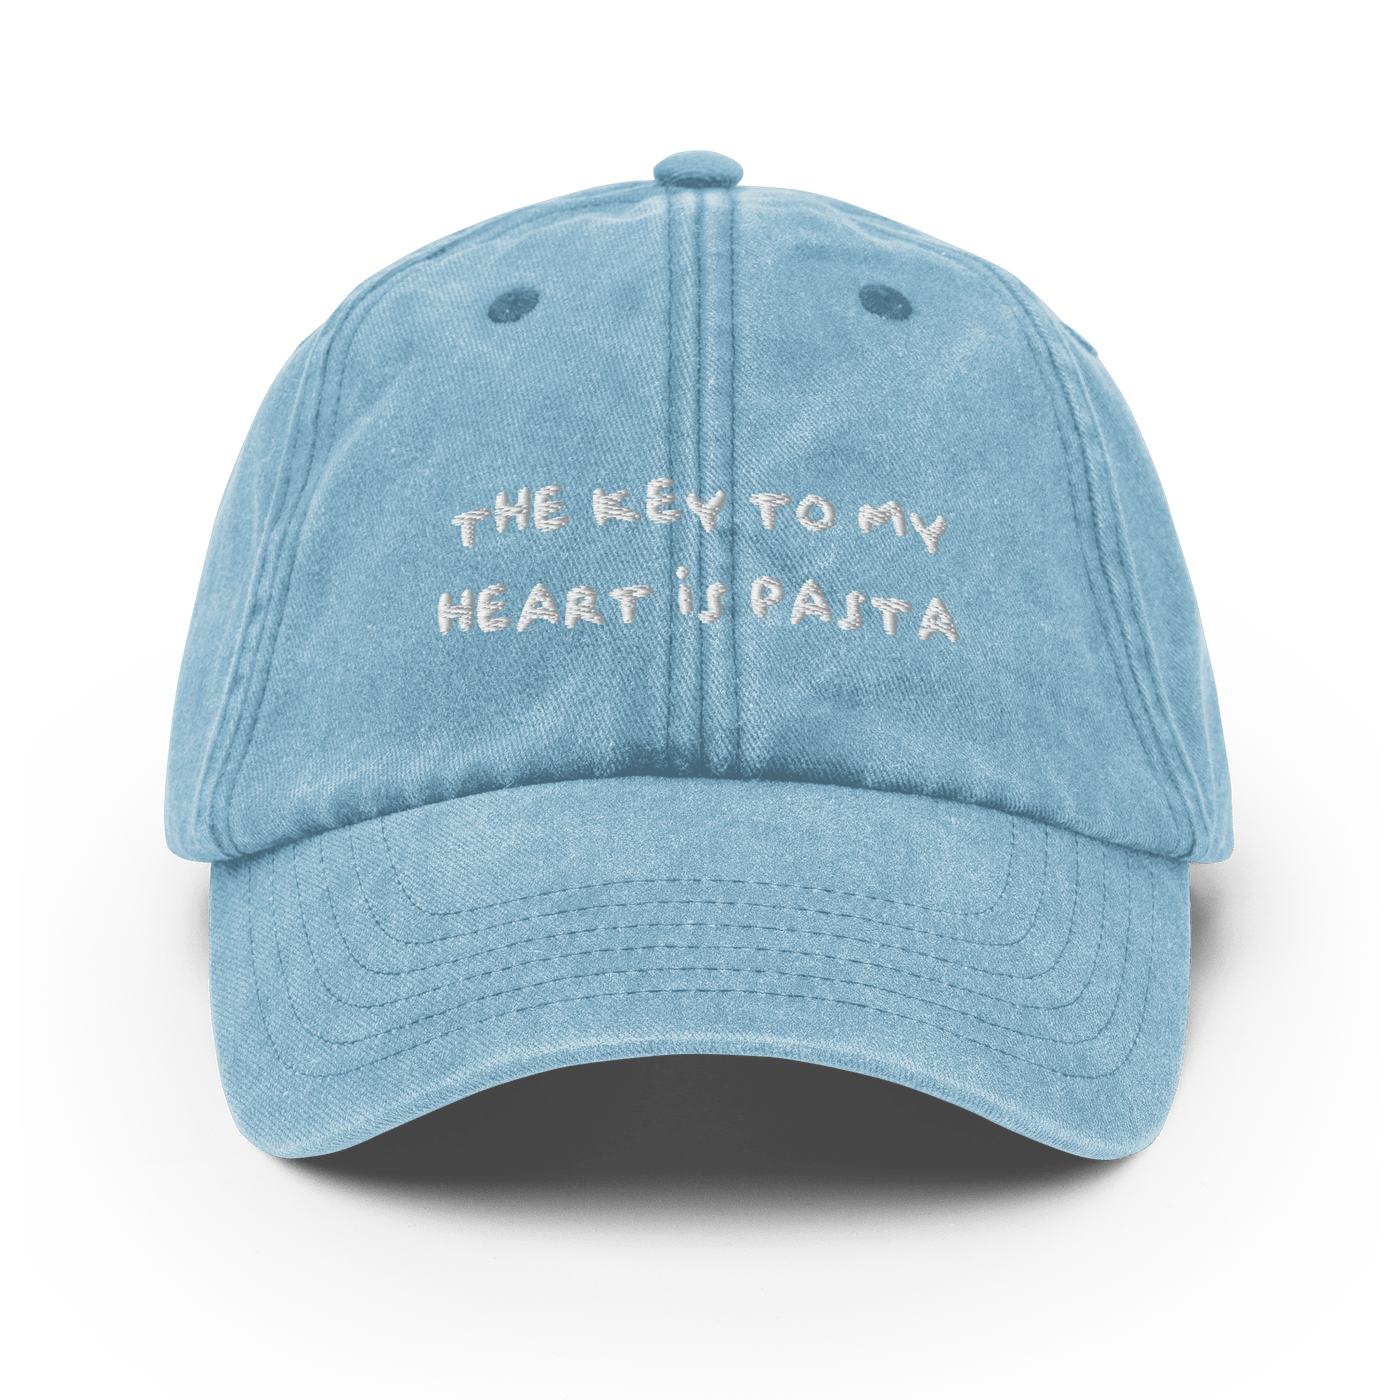 The key to my heart is pasta Vintage Hat - Vintage Light Denim - - Just Another Cap Store